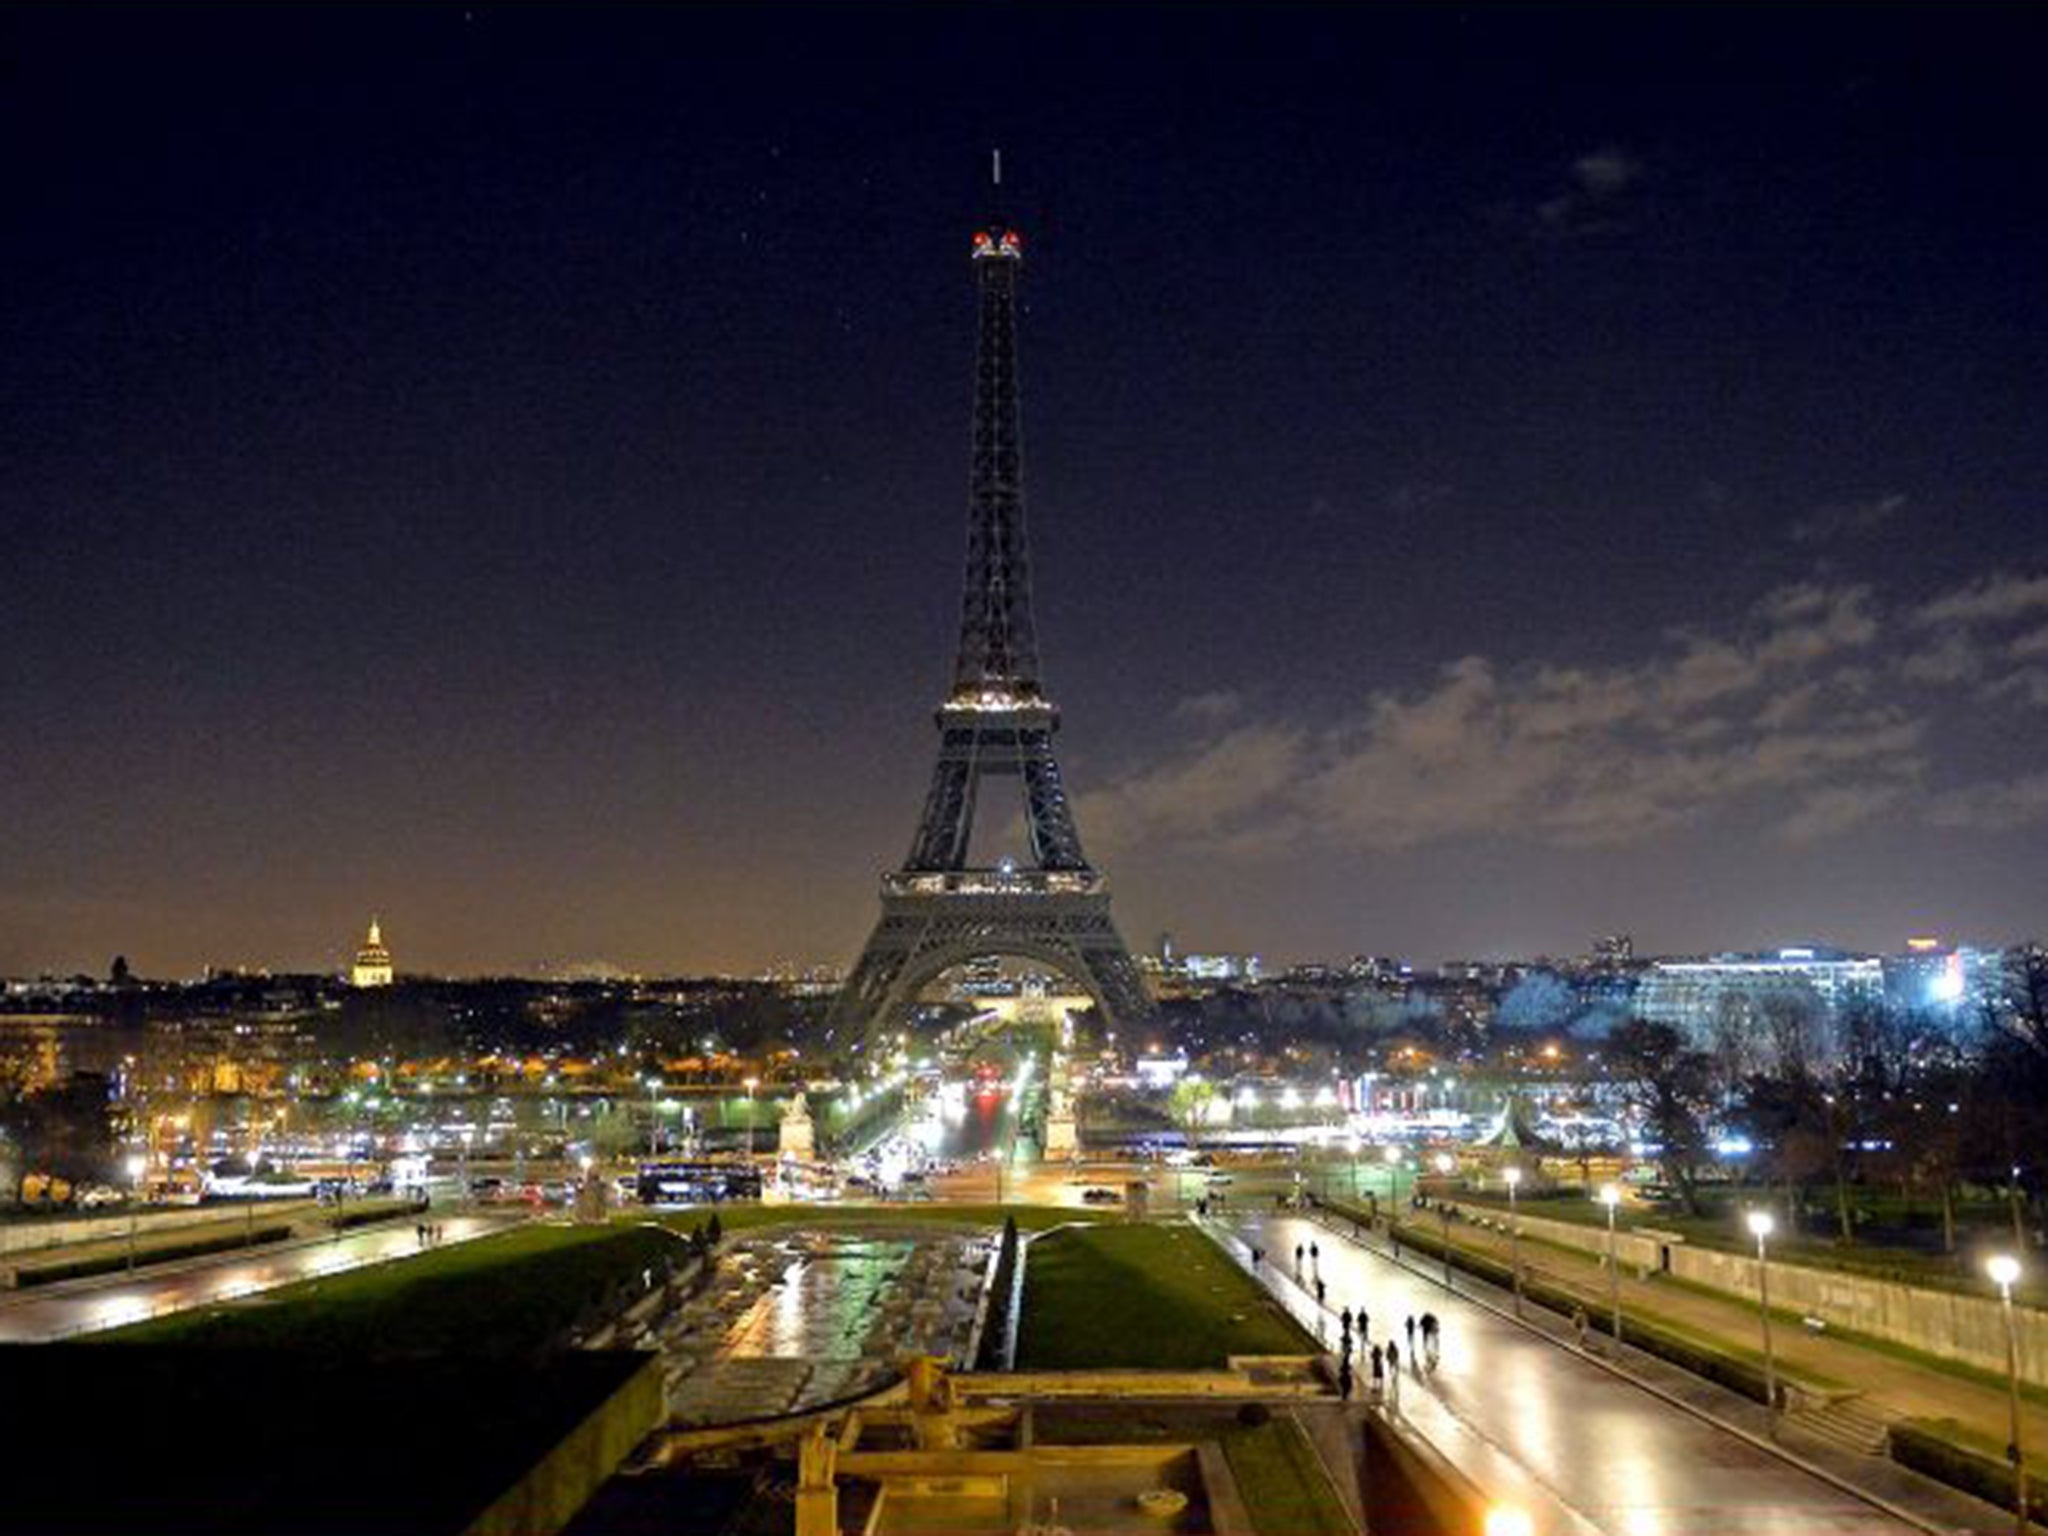 The lights of the Eiffel Tower were turned off in tribute on Thursday